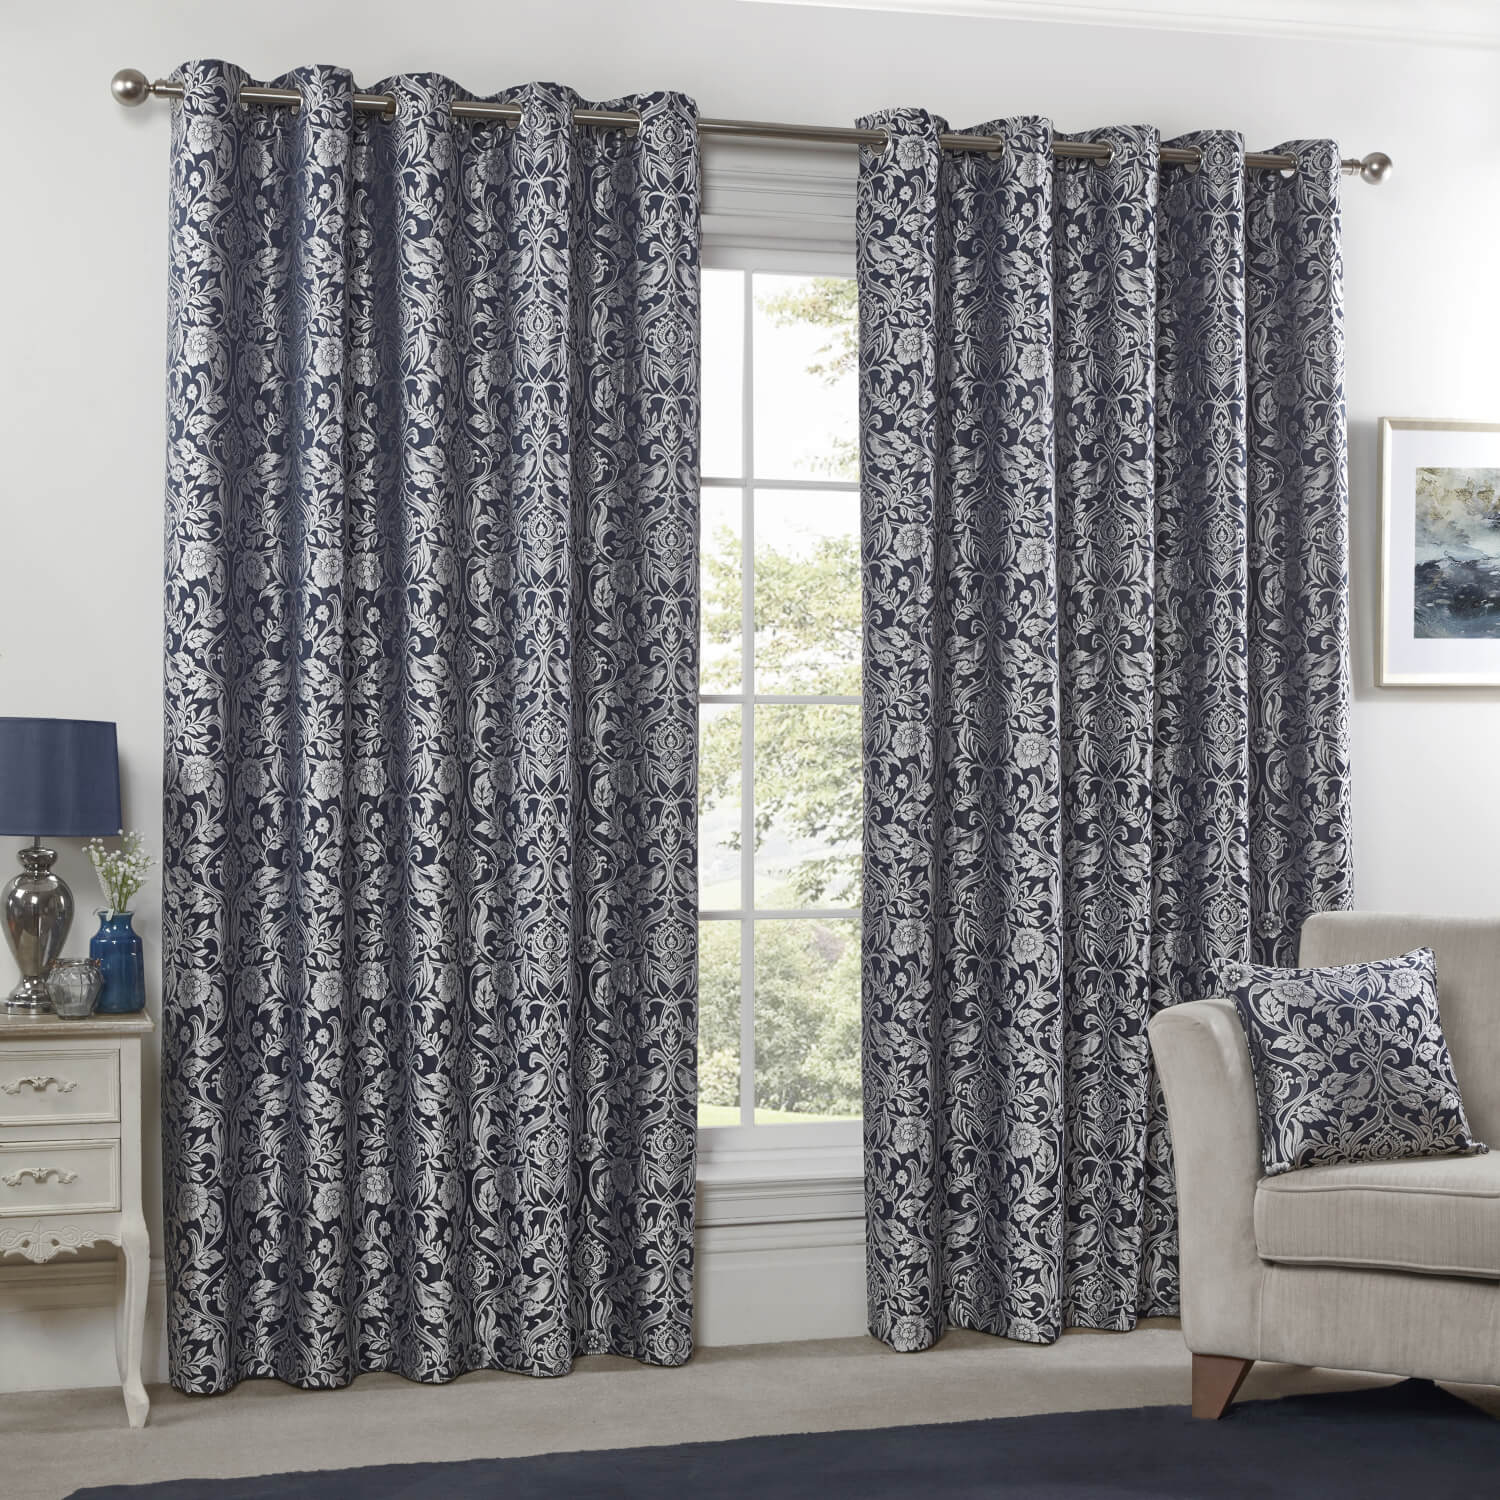 Maison By Emma Barclay Lined Eyelet Jacquard Curtains - Navy 1 Shaws Department Stores